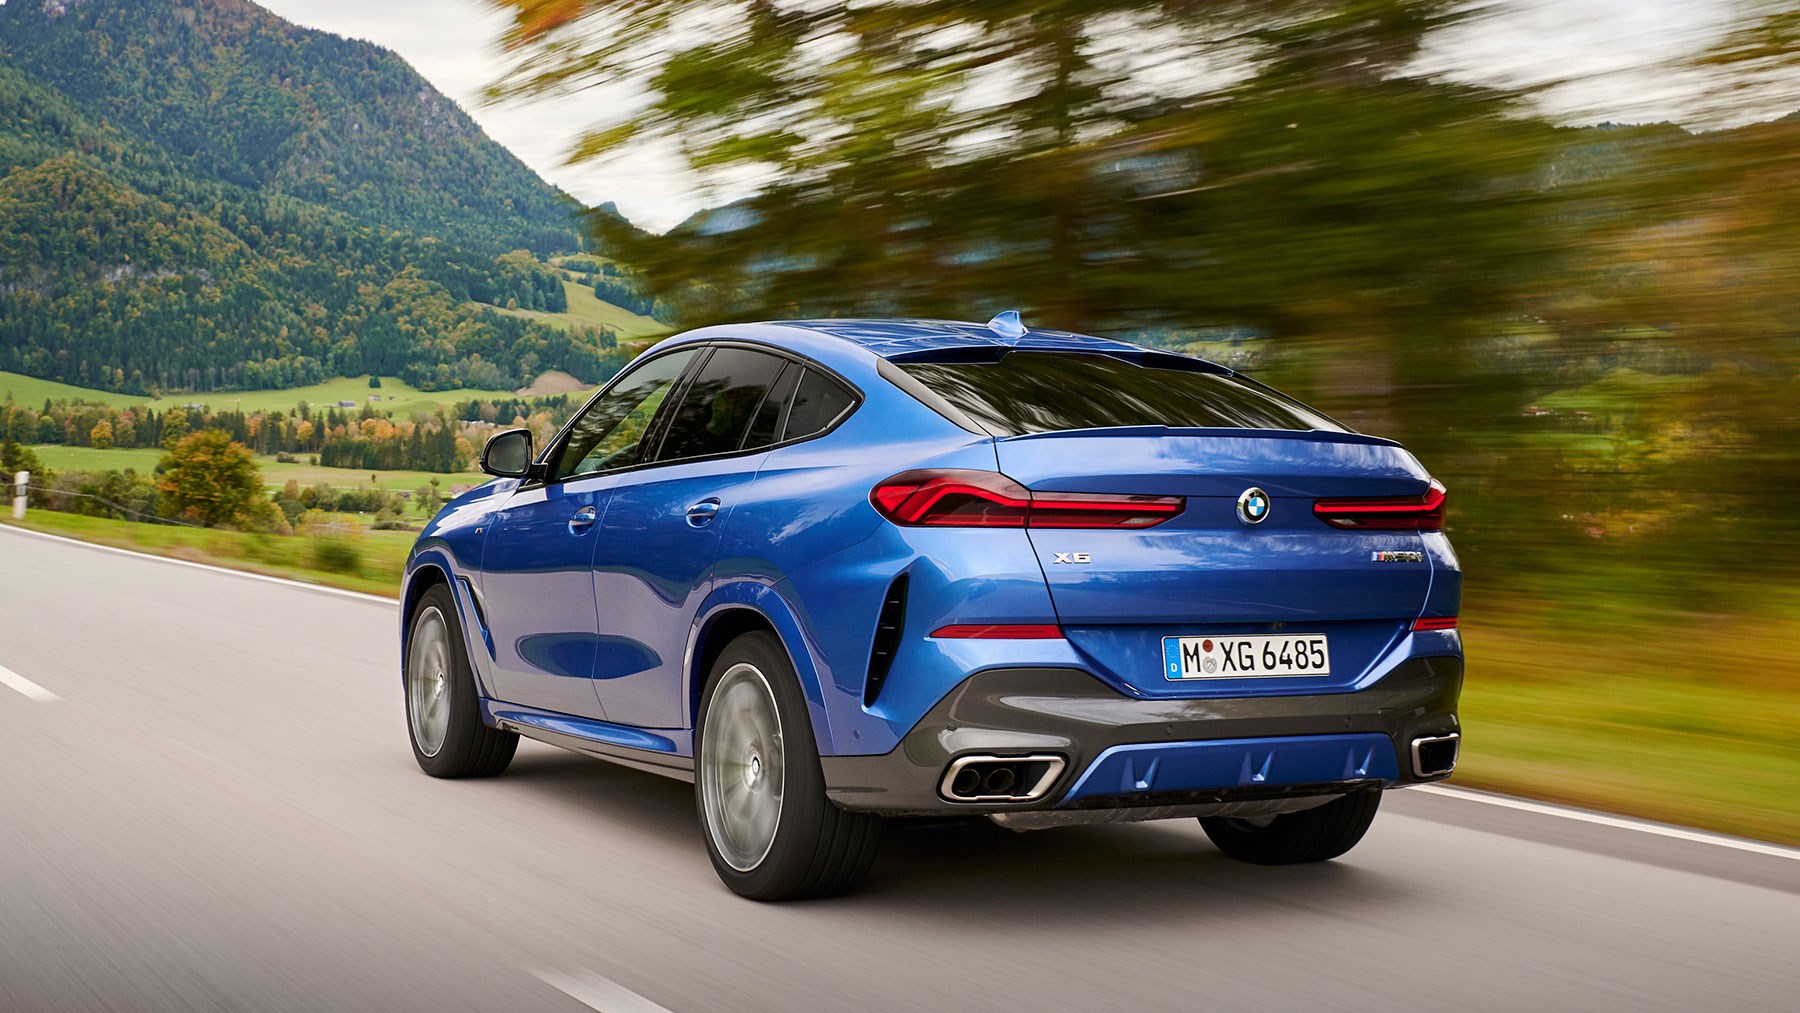 BMW X6 review: the Marmite SUV comes of age